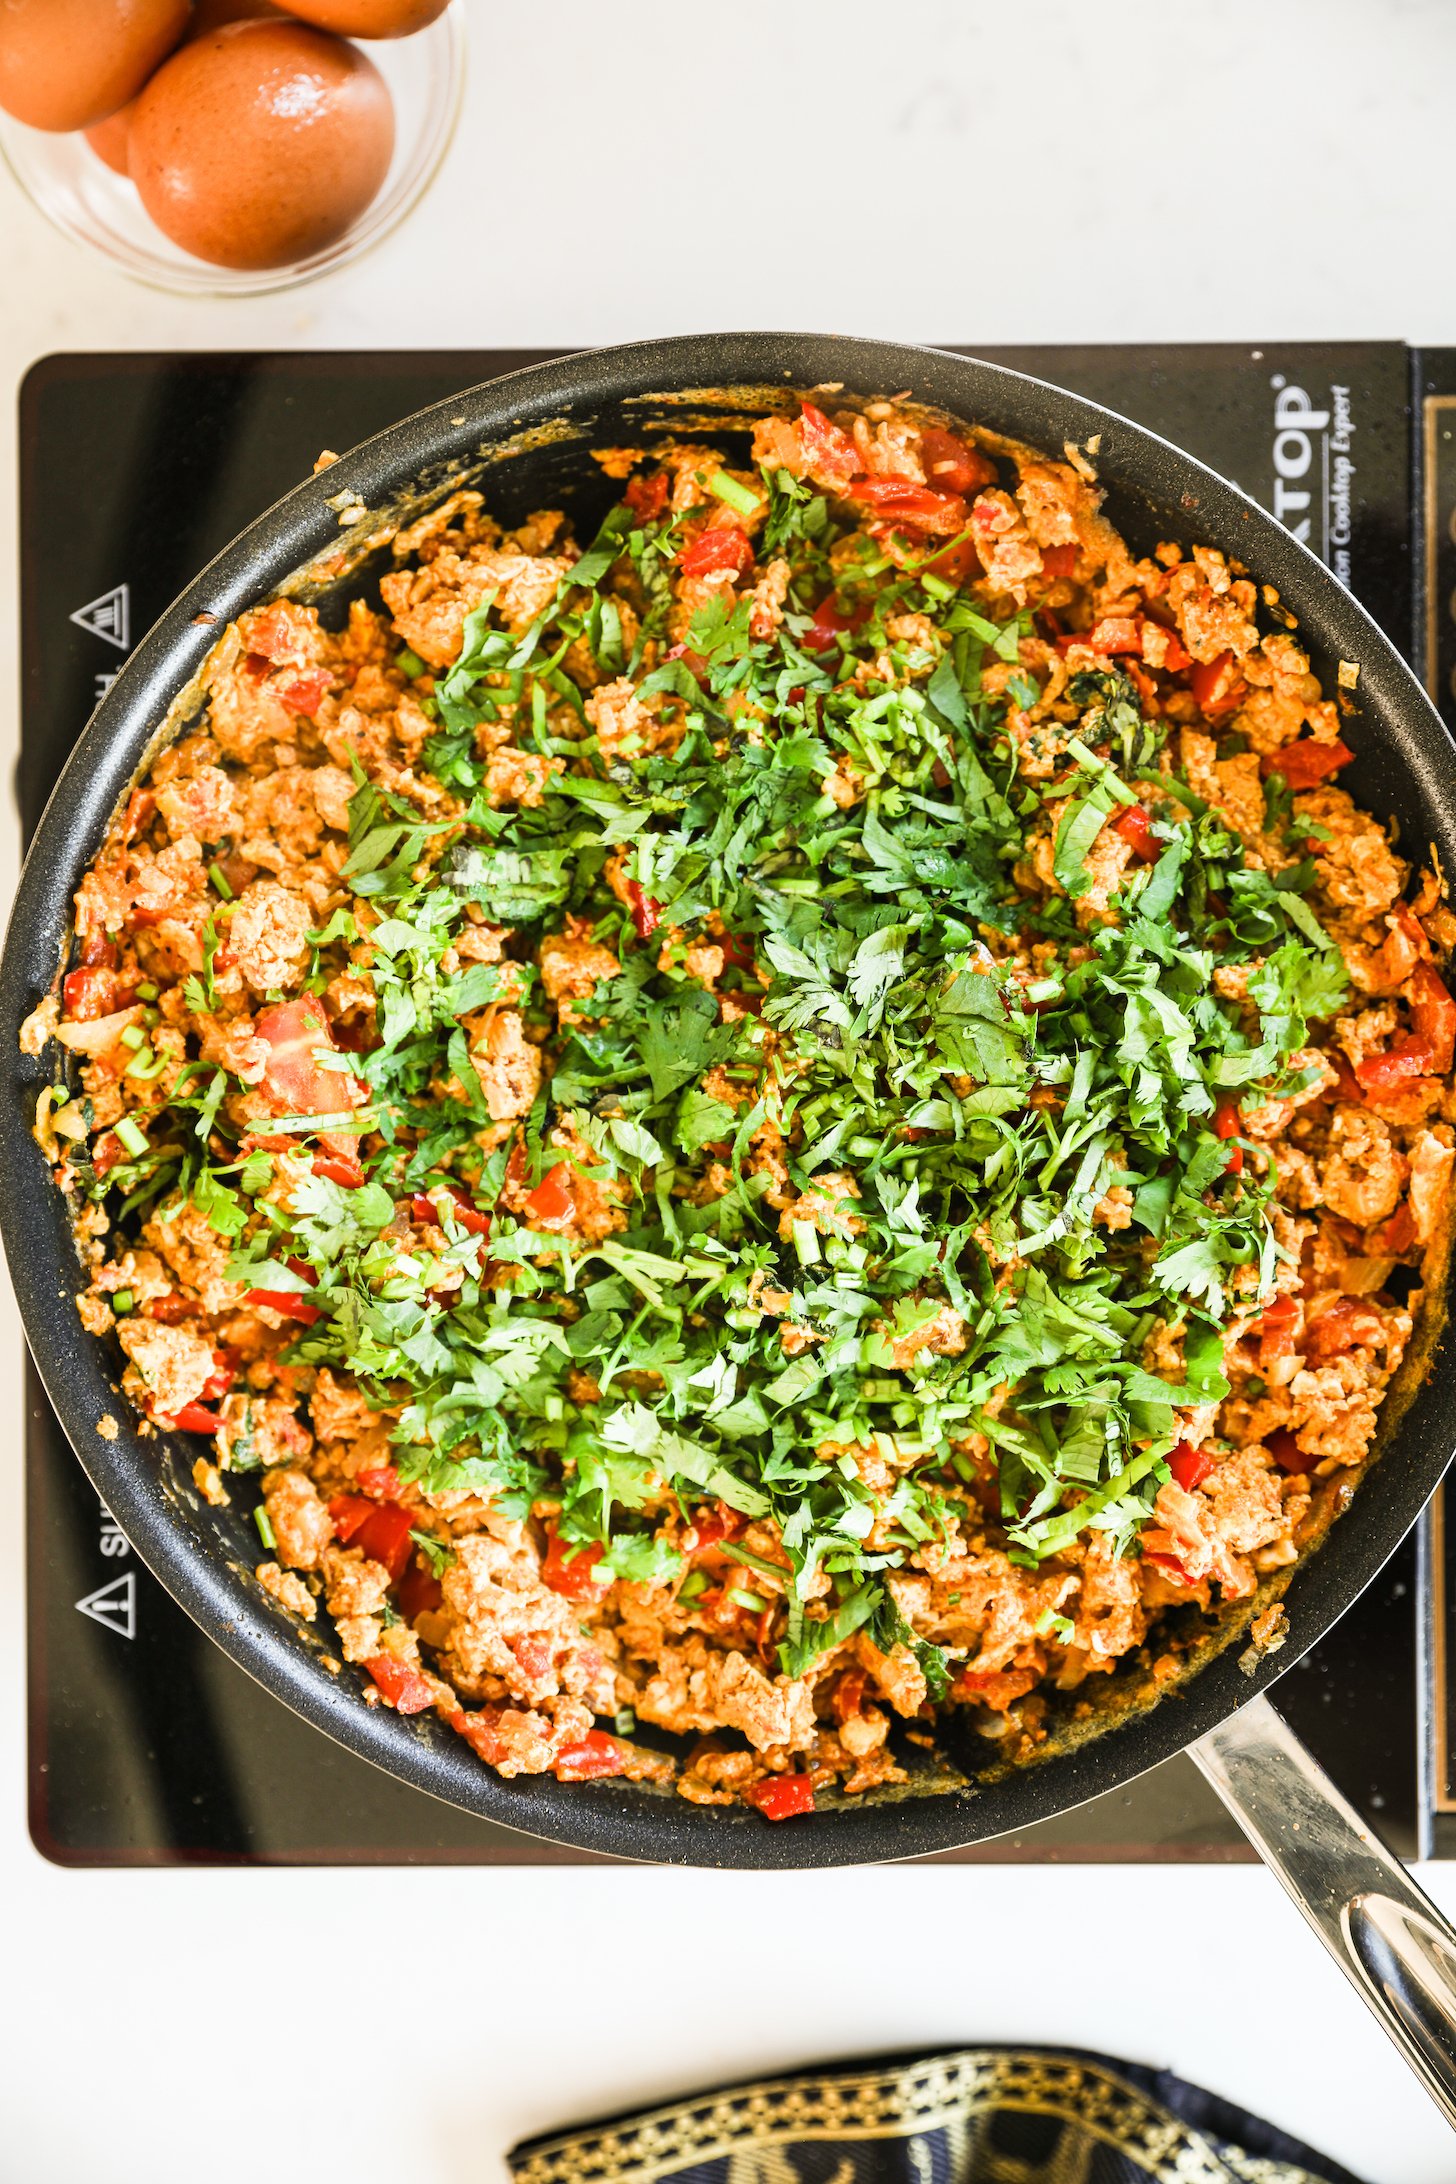 Overhead view of cooked egg bhurji topped with cilantro.